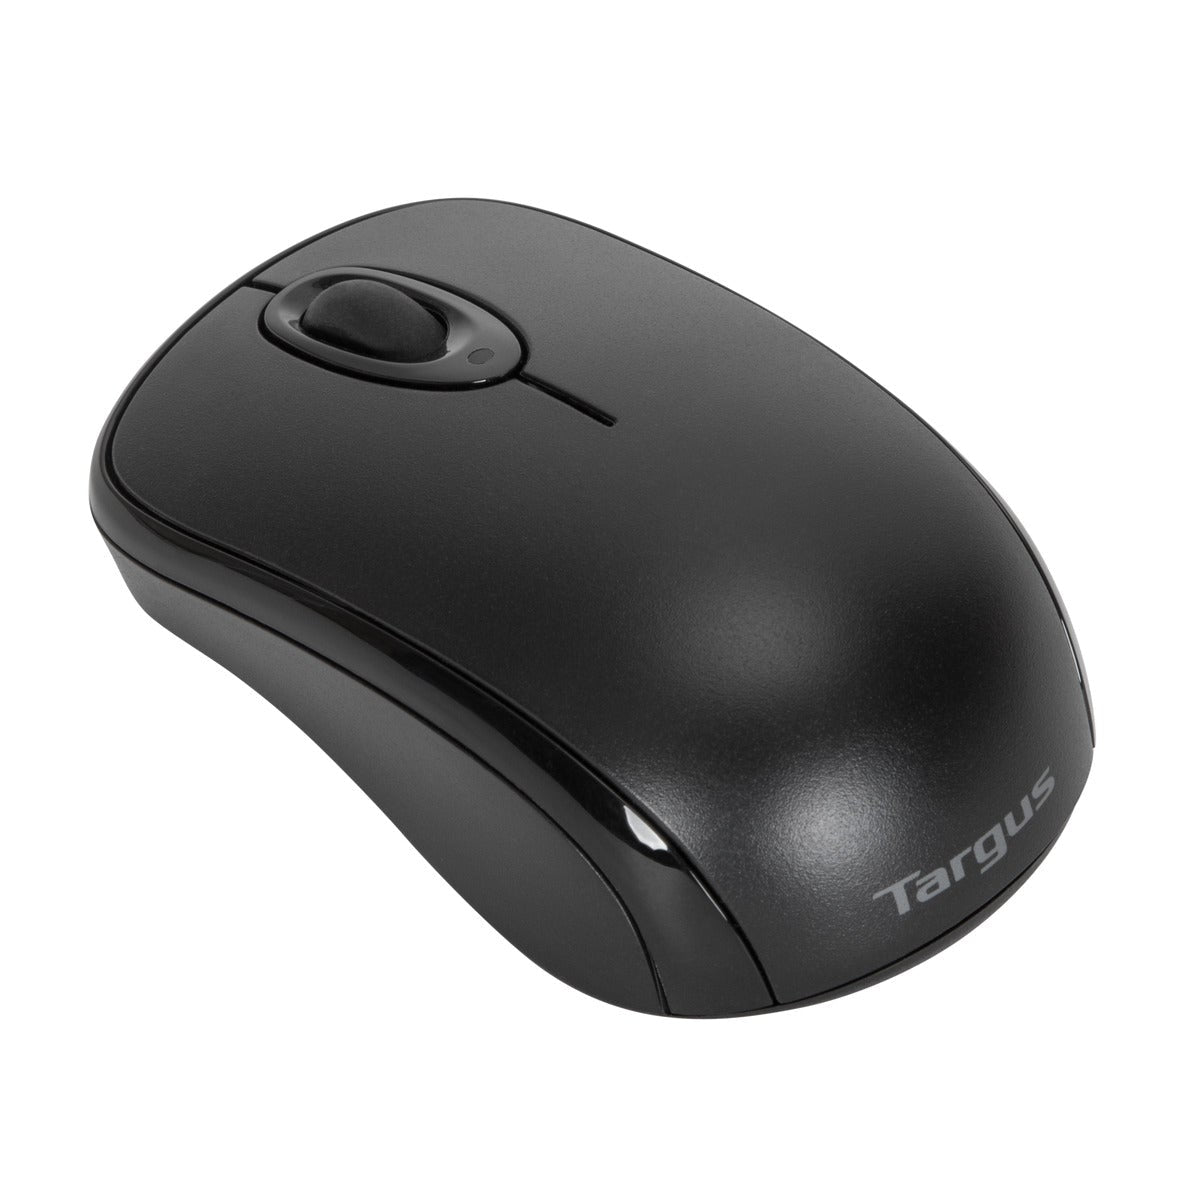 TARGUS Certified Works With Chromebook mouse with wireless | Bluetooth convenience (AMB844GL) TARGUS